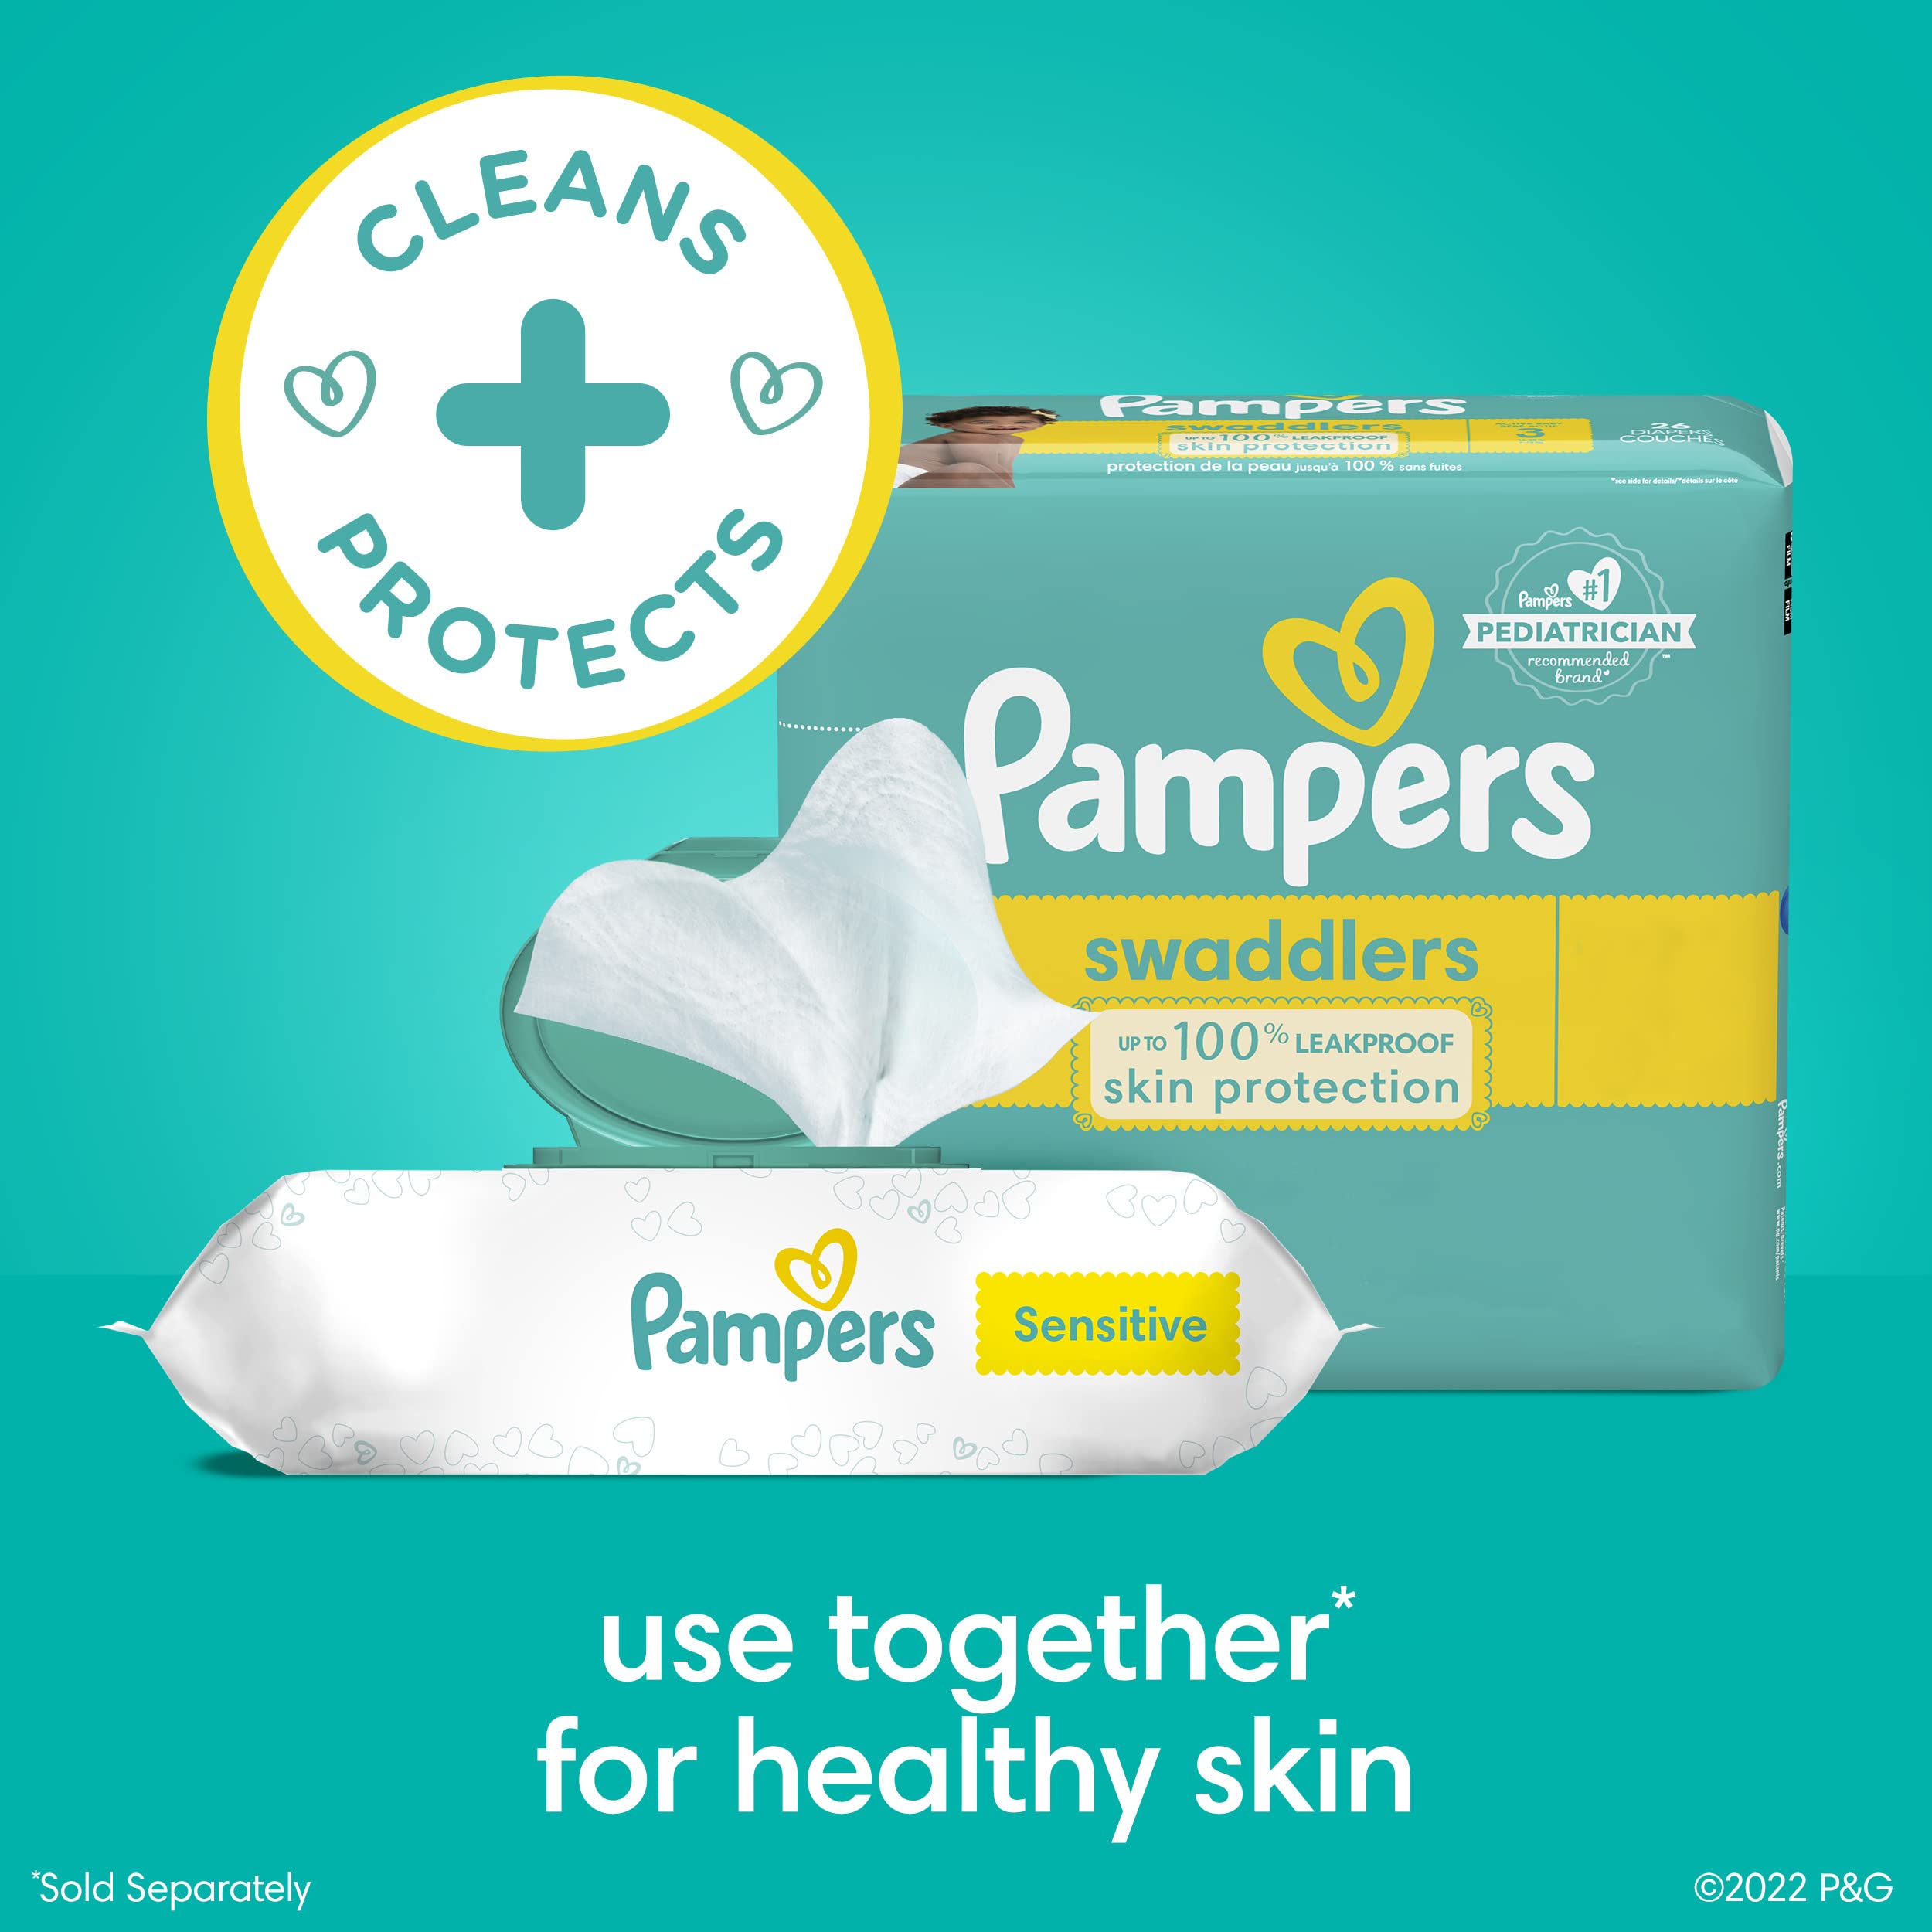 Pampers Baby Wipes Combo, 1008 count - Sensitive Water Based Hypoallergenic and Unscented Baby Wipes (Packaging May Vary)